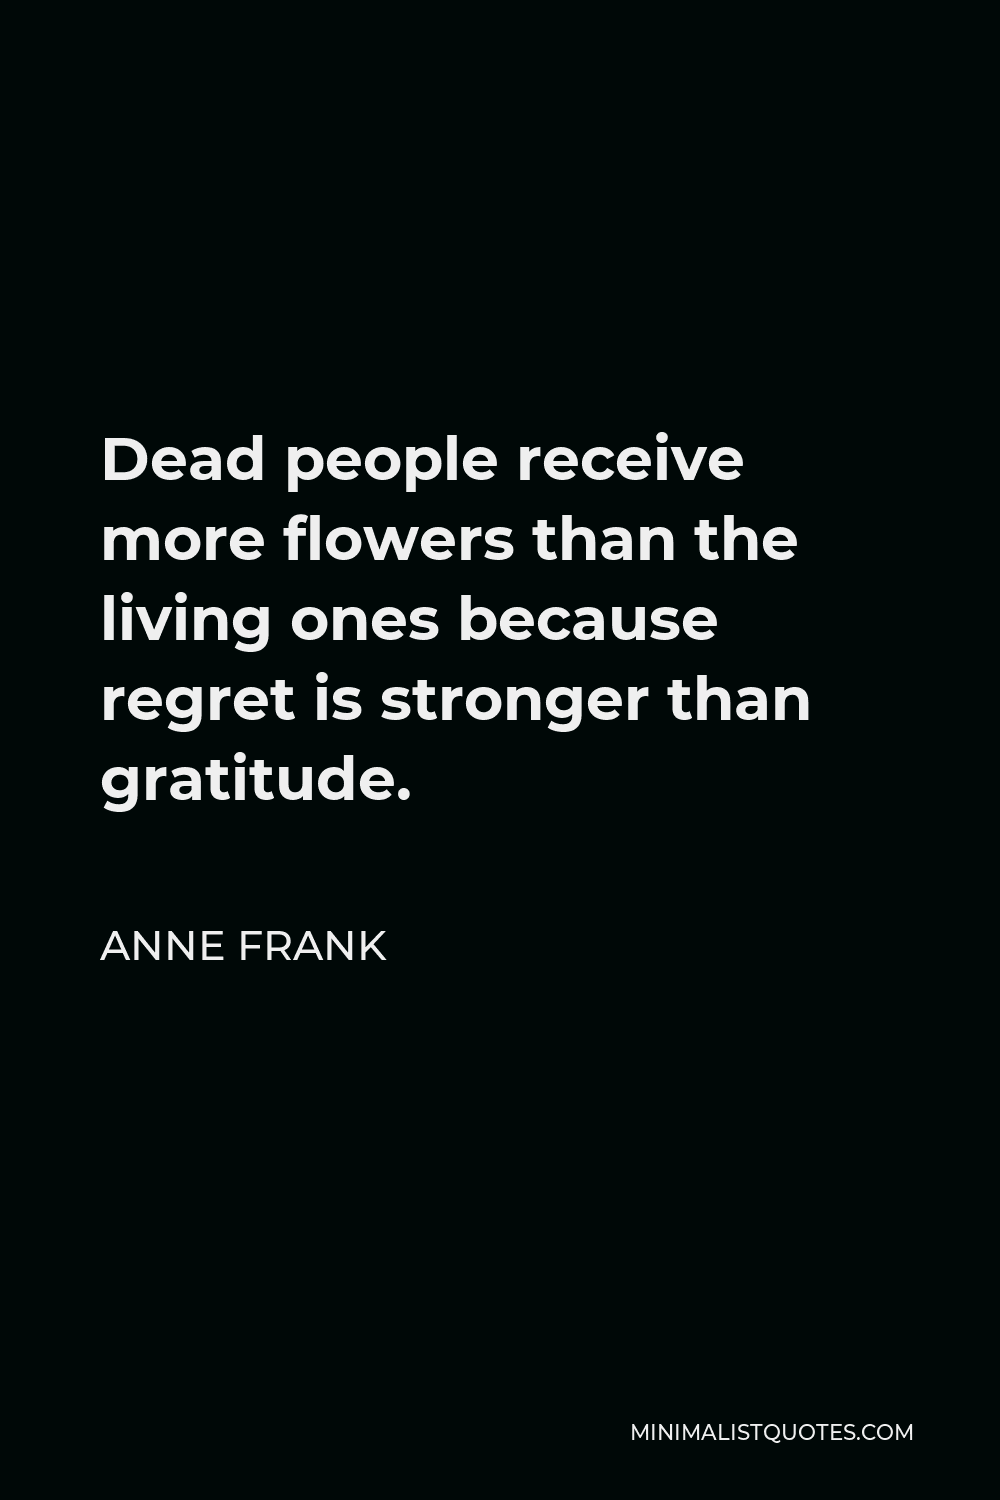 Anne Frank Quote Dead People Receive More Flowers Than The Living Ones Because Regret Is Stronger Than Gratitude